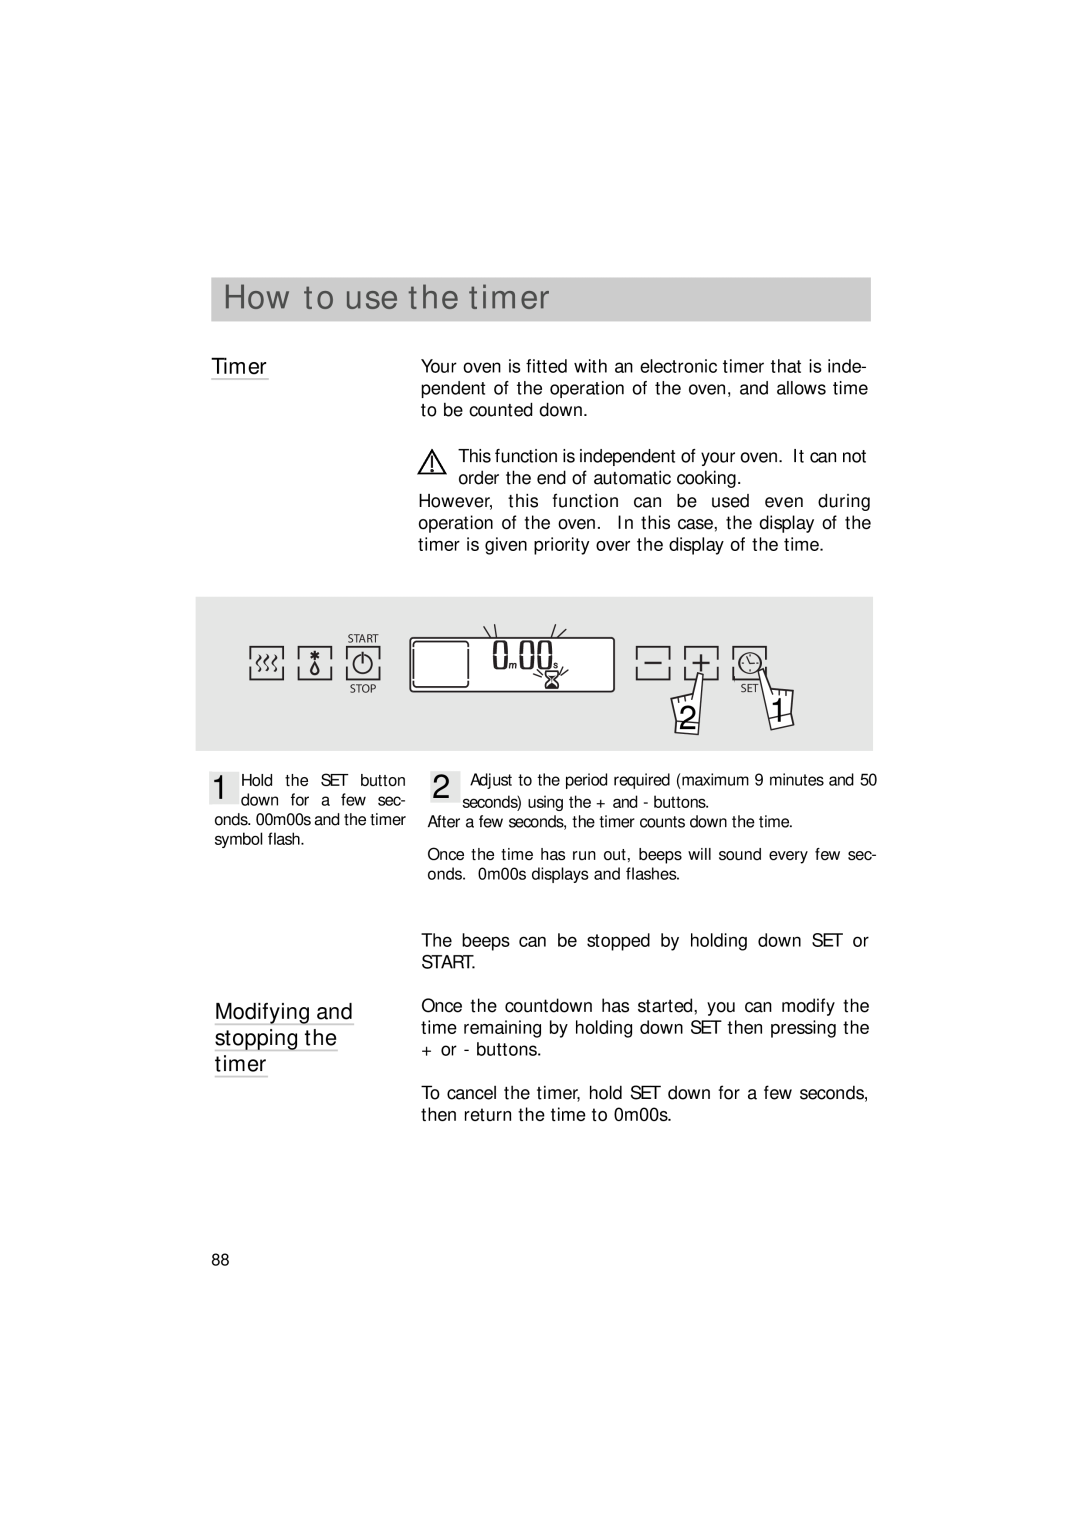 Hotpoint SEO100 manual How to use the timer, Timer, Modifying and stopping the timer 